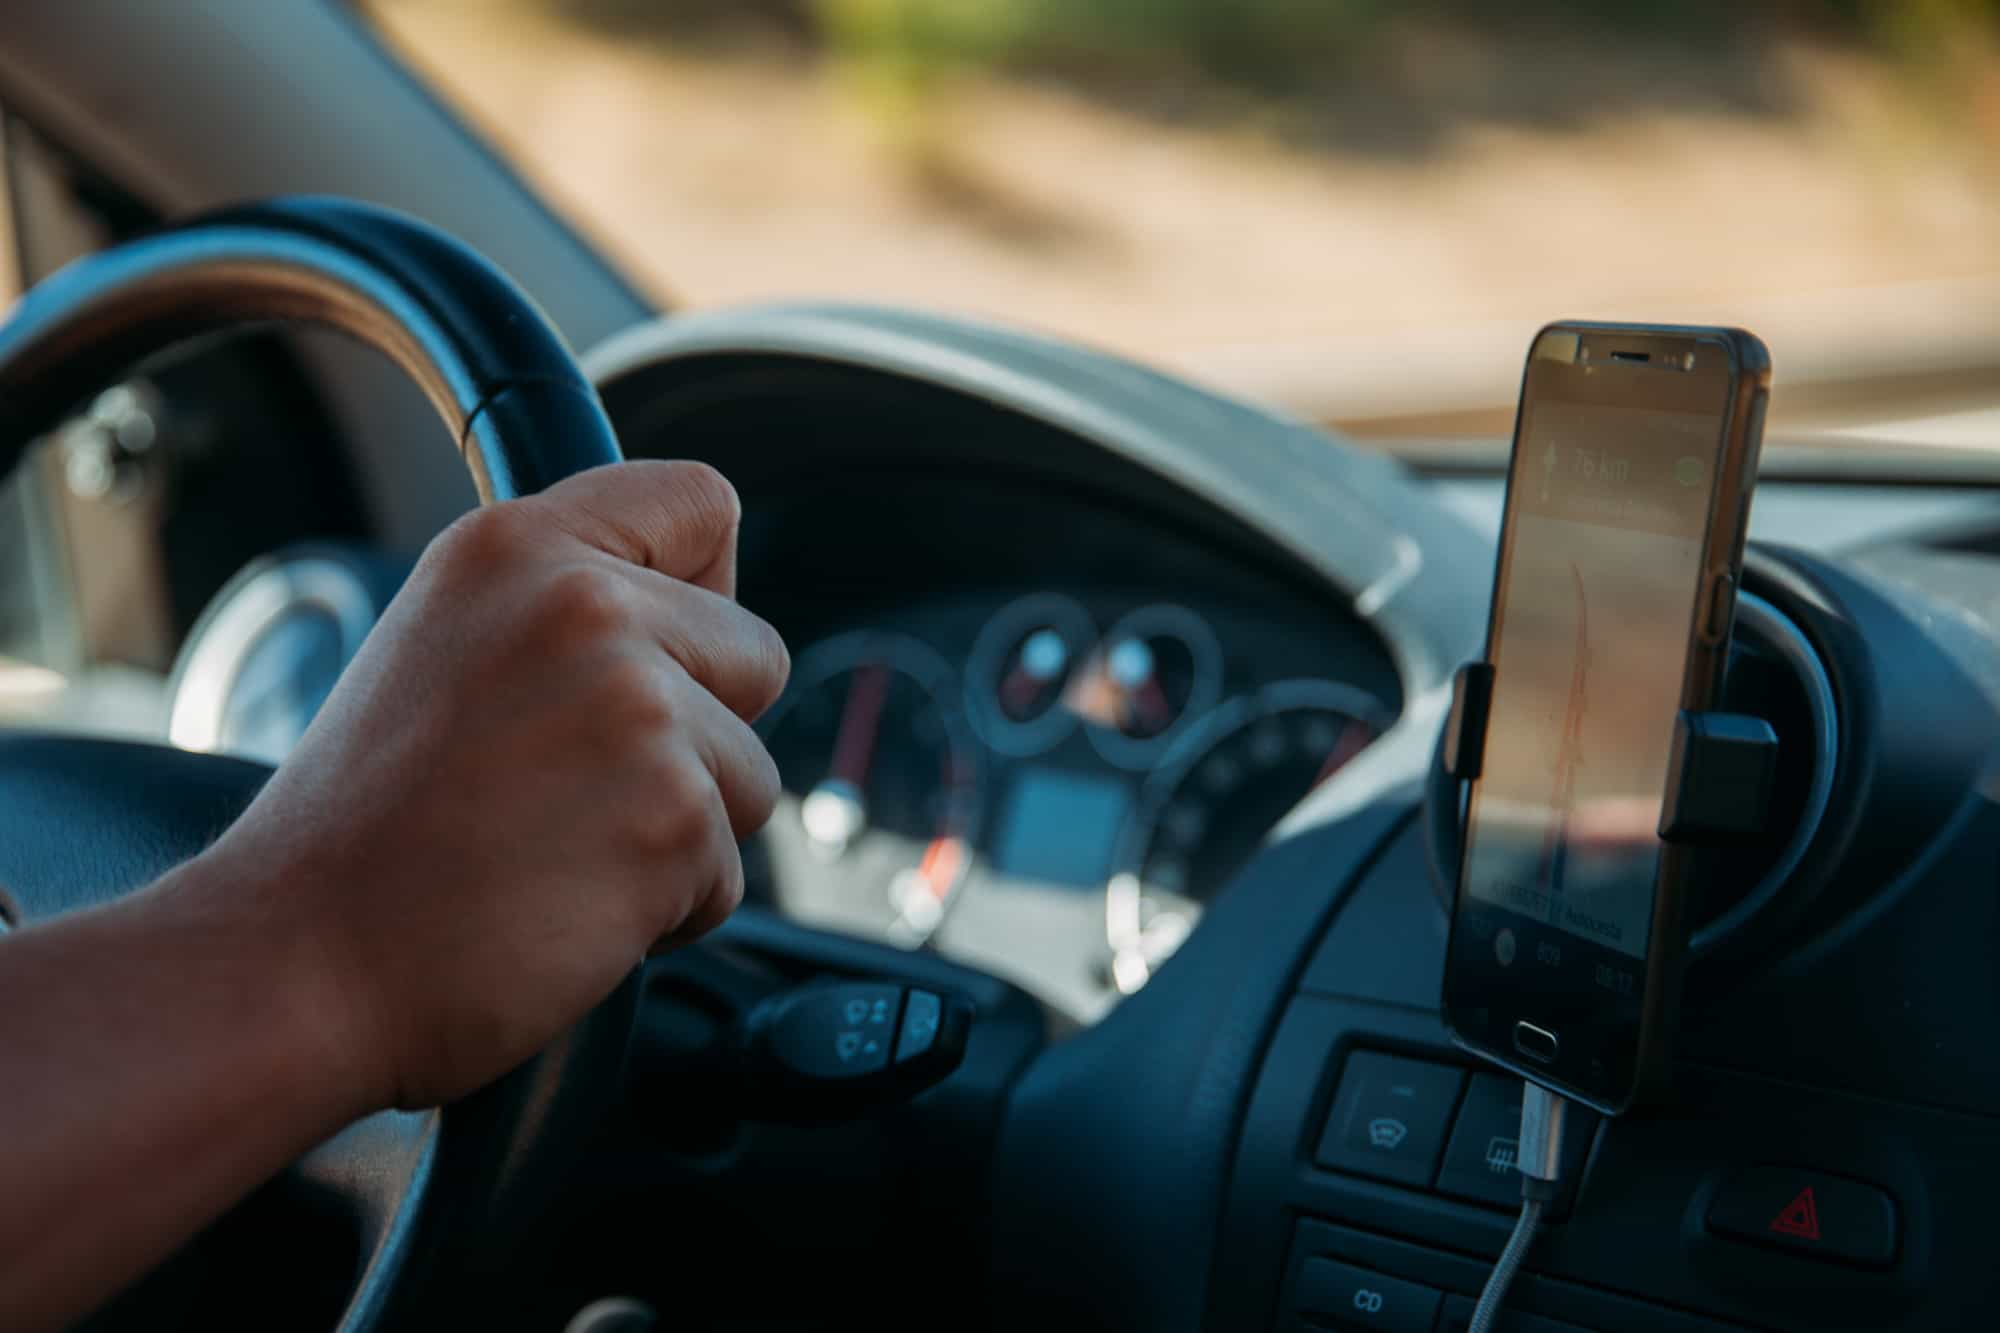 Smartphone mounted in car phone holder